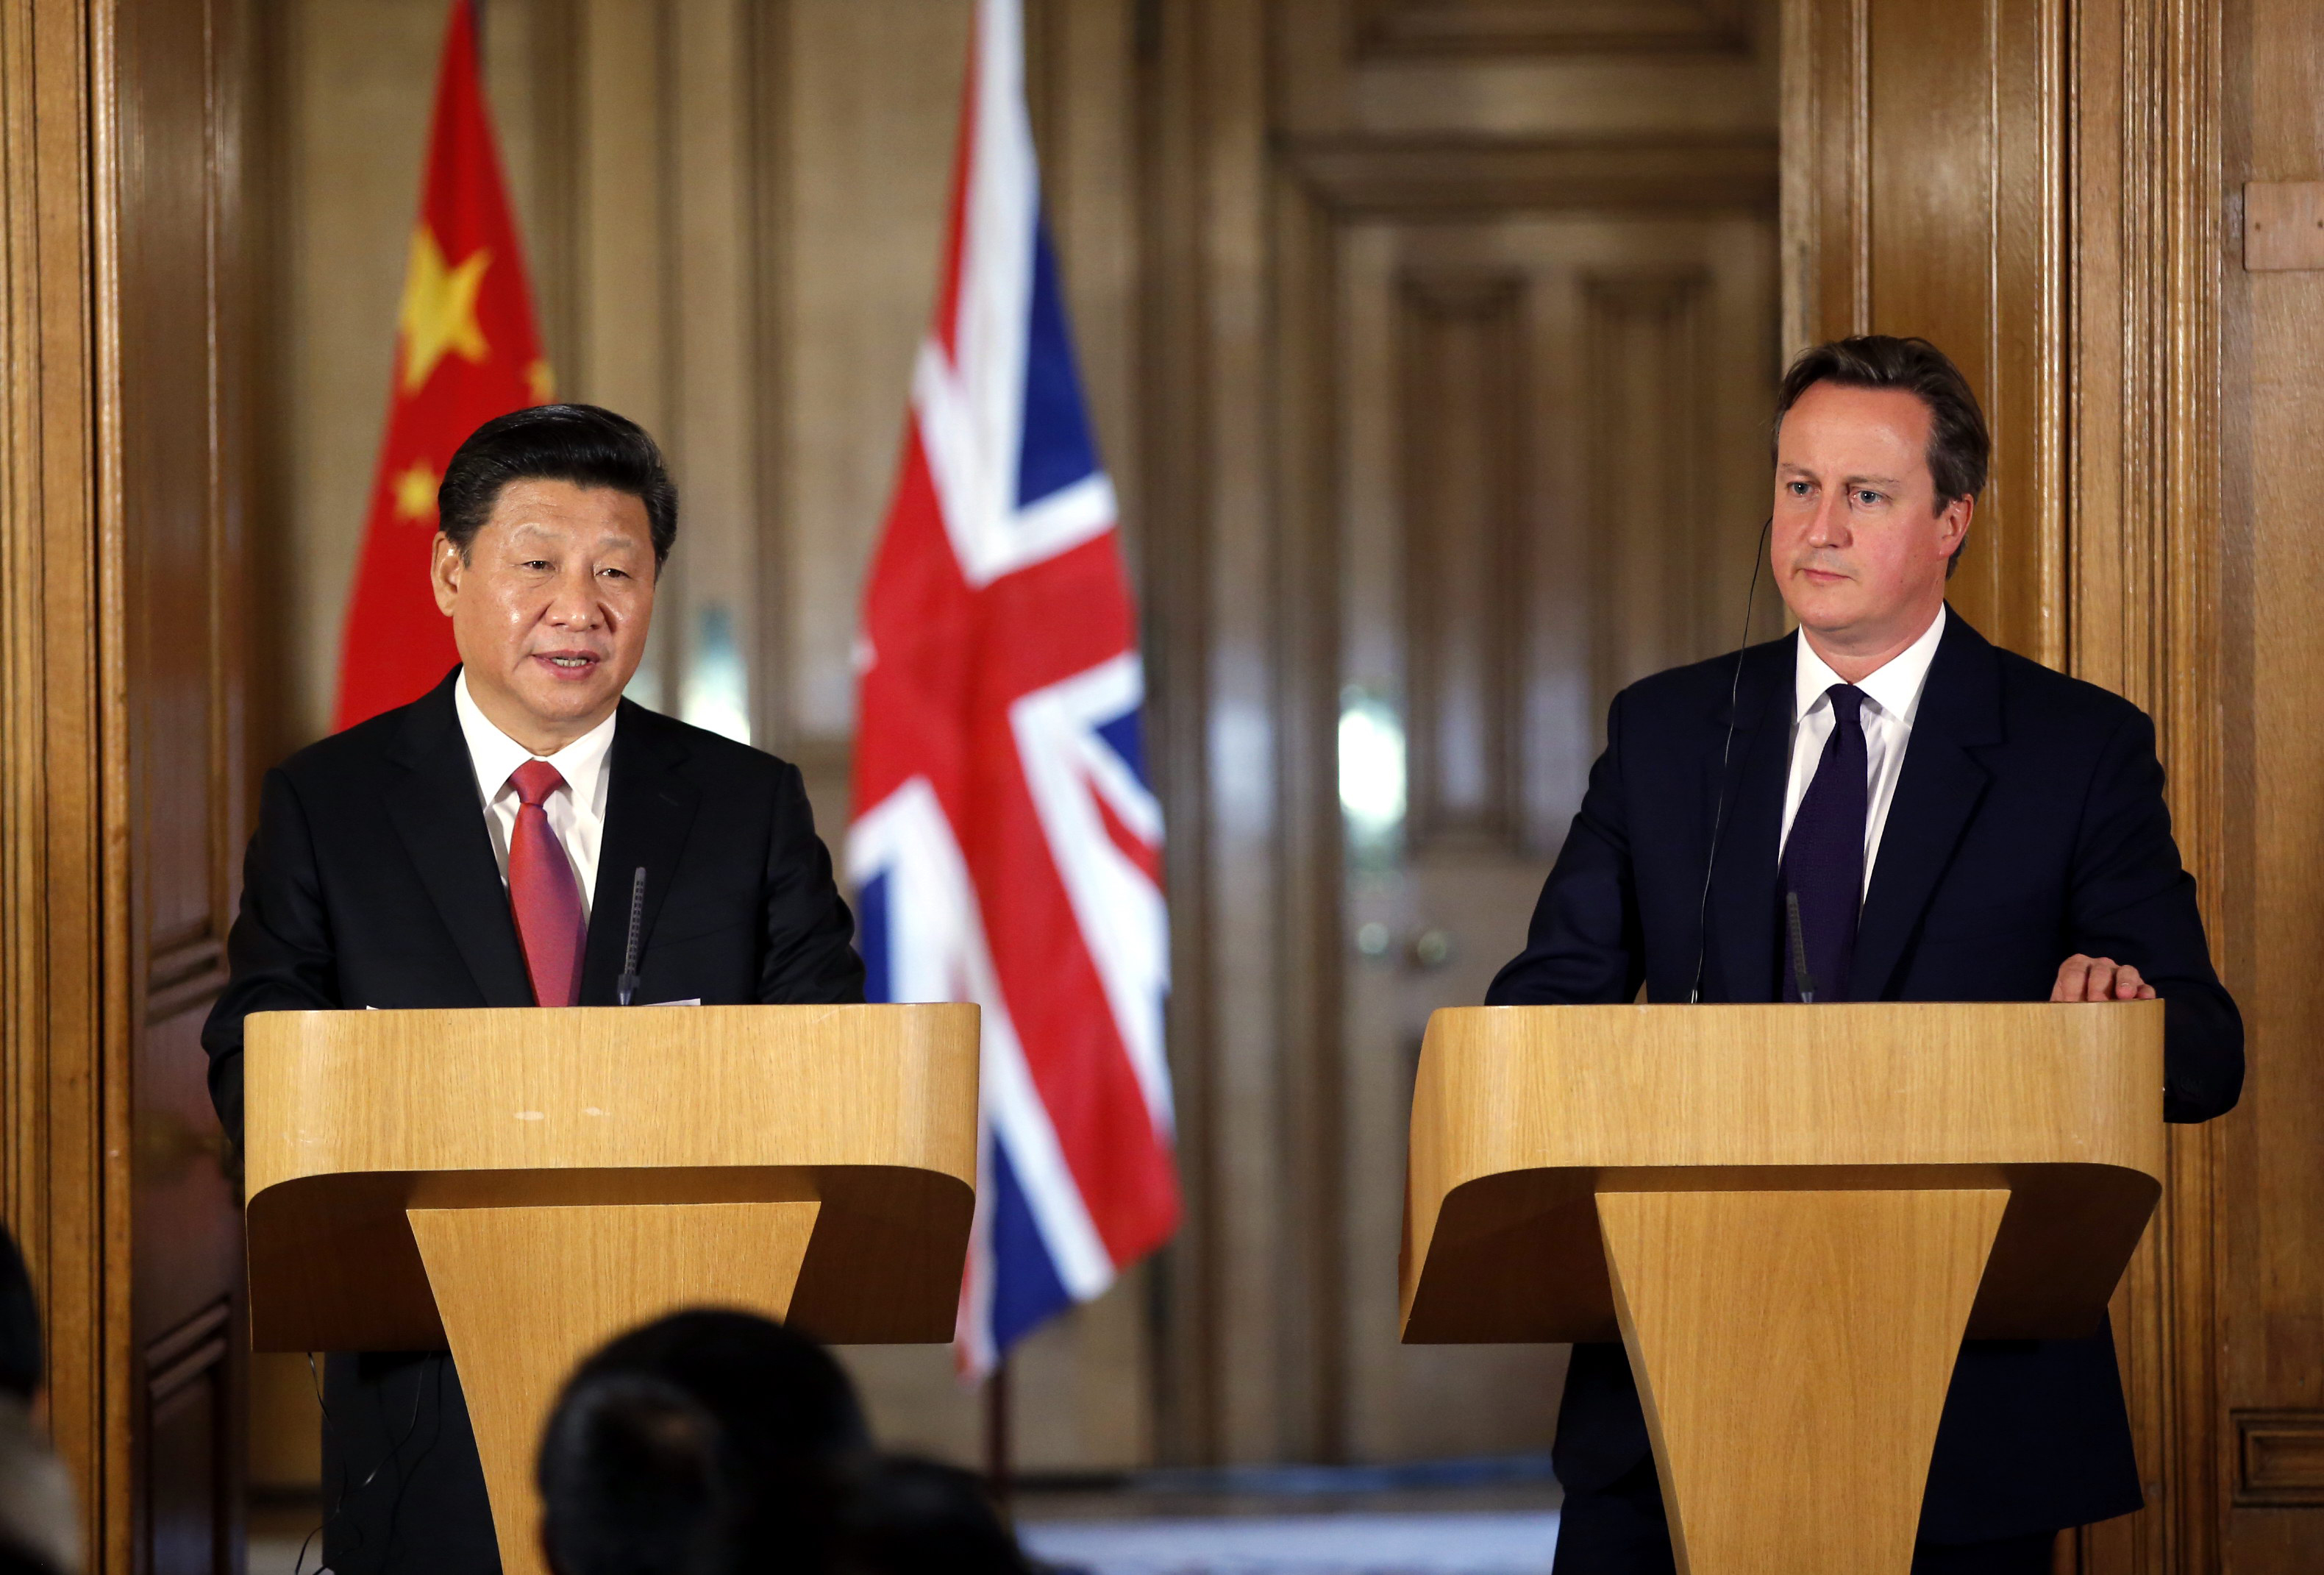 President Xi and British Prime Minister David Cameron speak to the press on Wednesday after they met during the Chinese head of state's visit to the UK. Photo: Xinhua